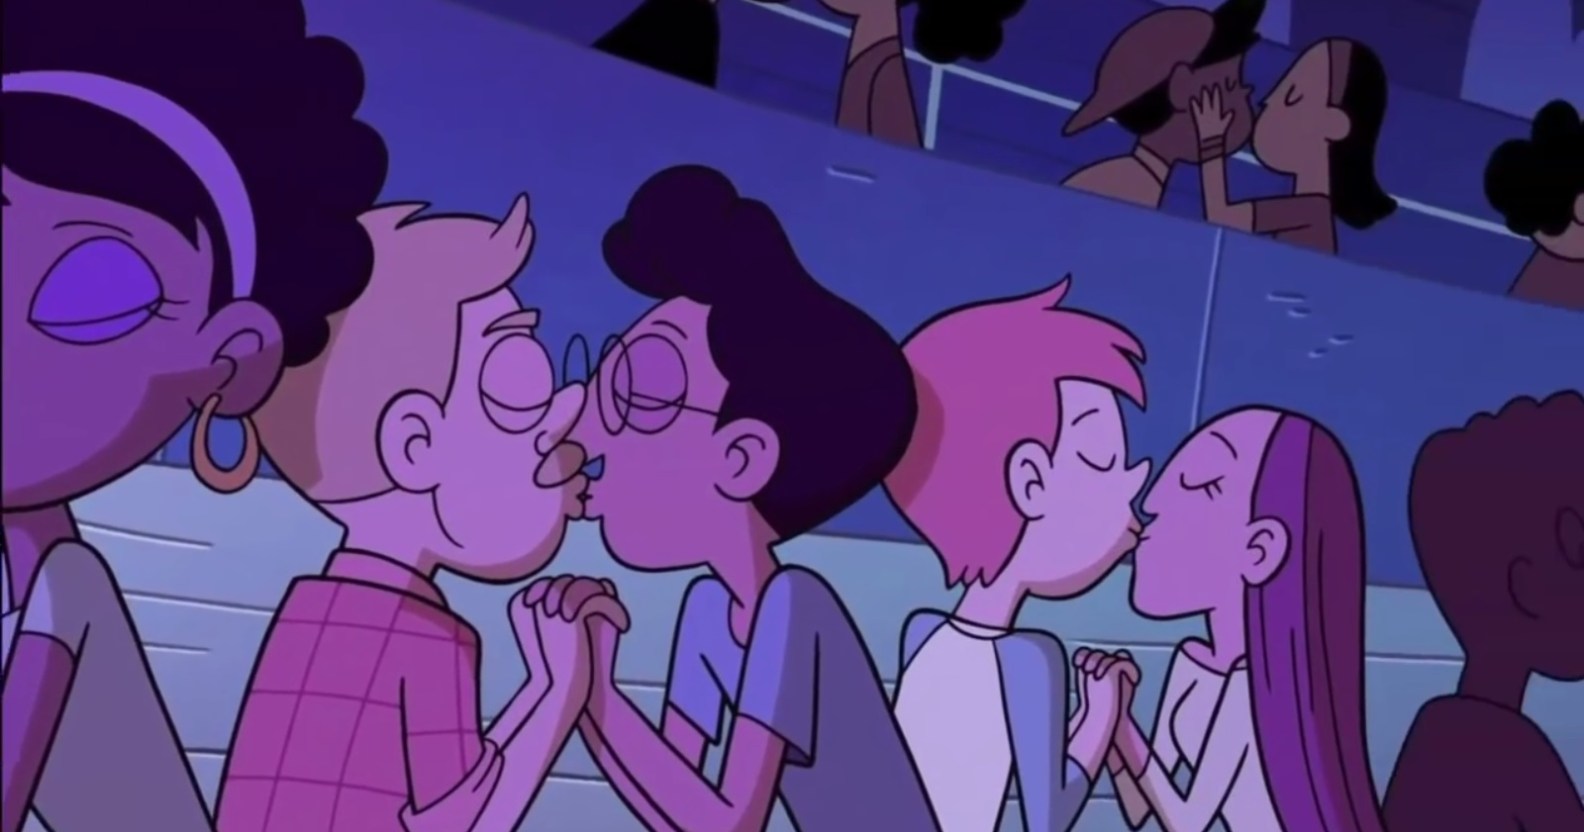 Disney XD cartoon Star vs. the Forces of Evil featured a subtle gay kiss